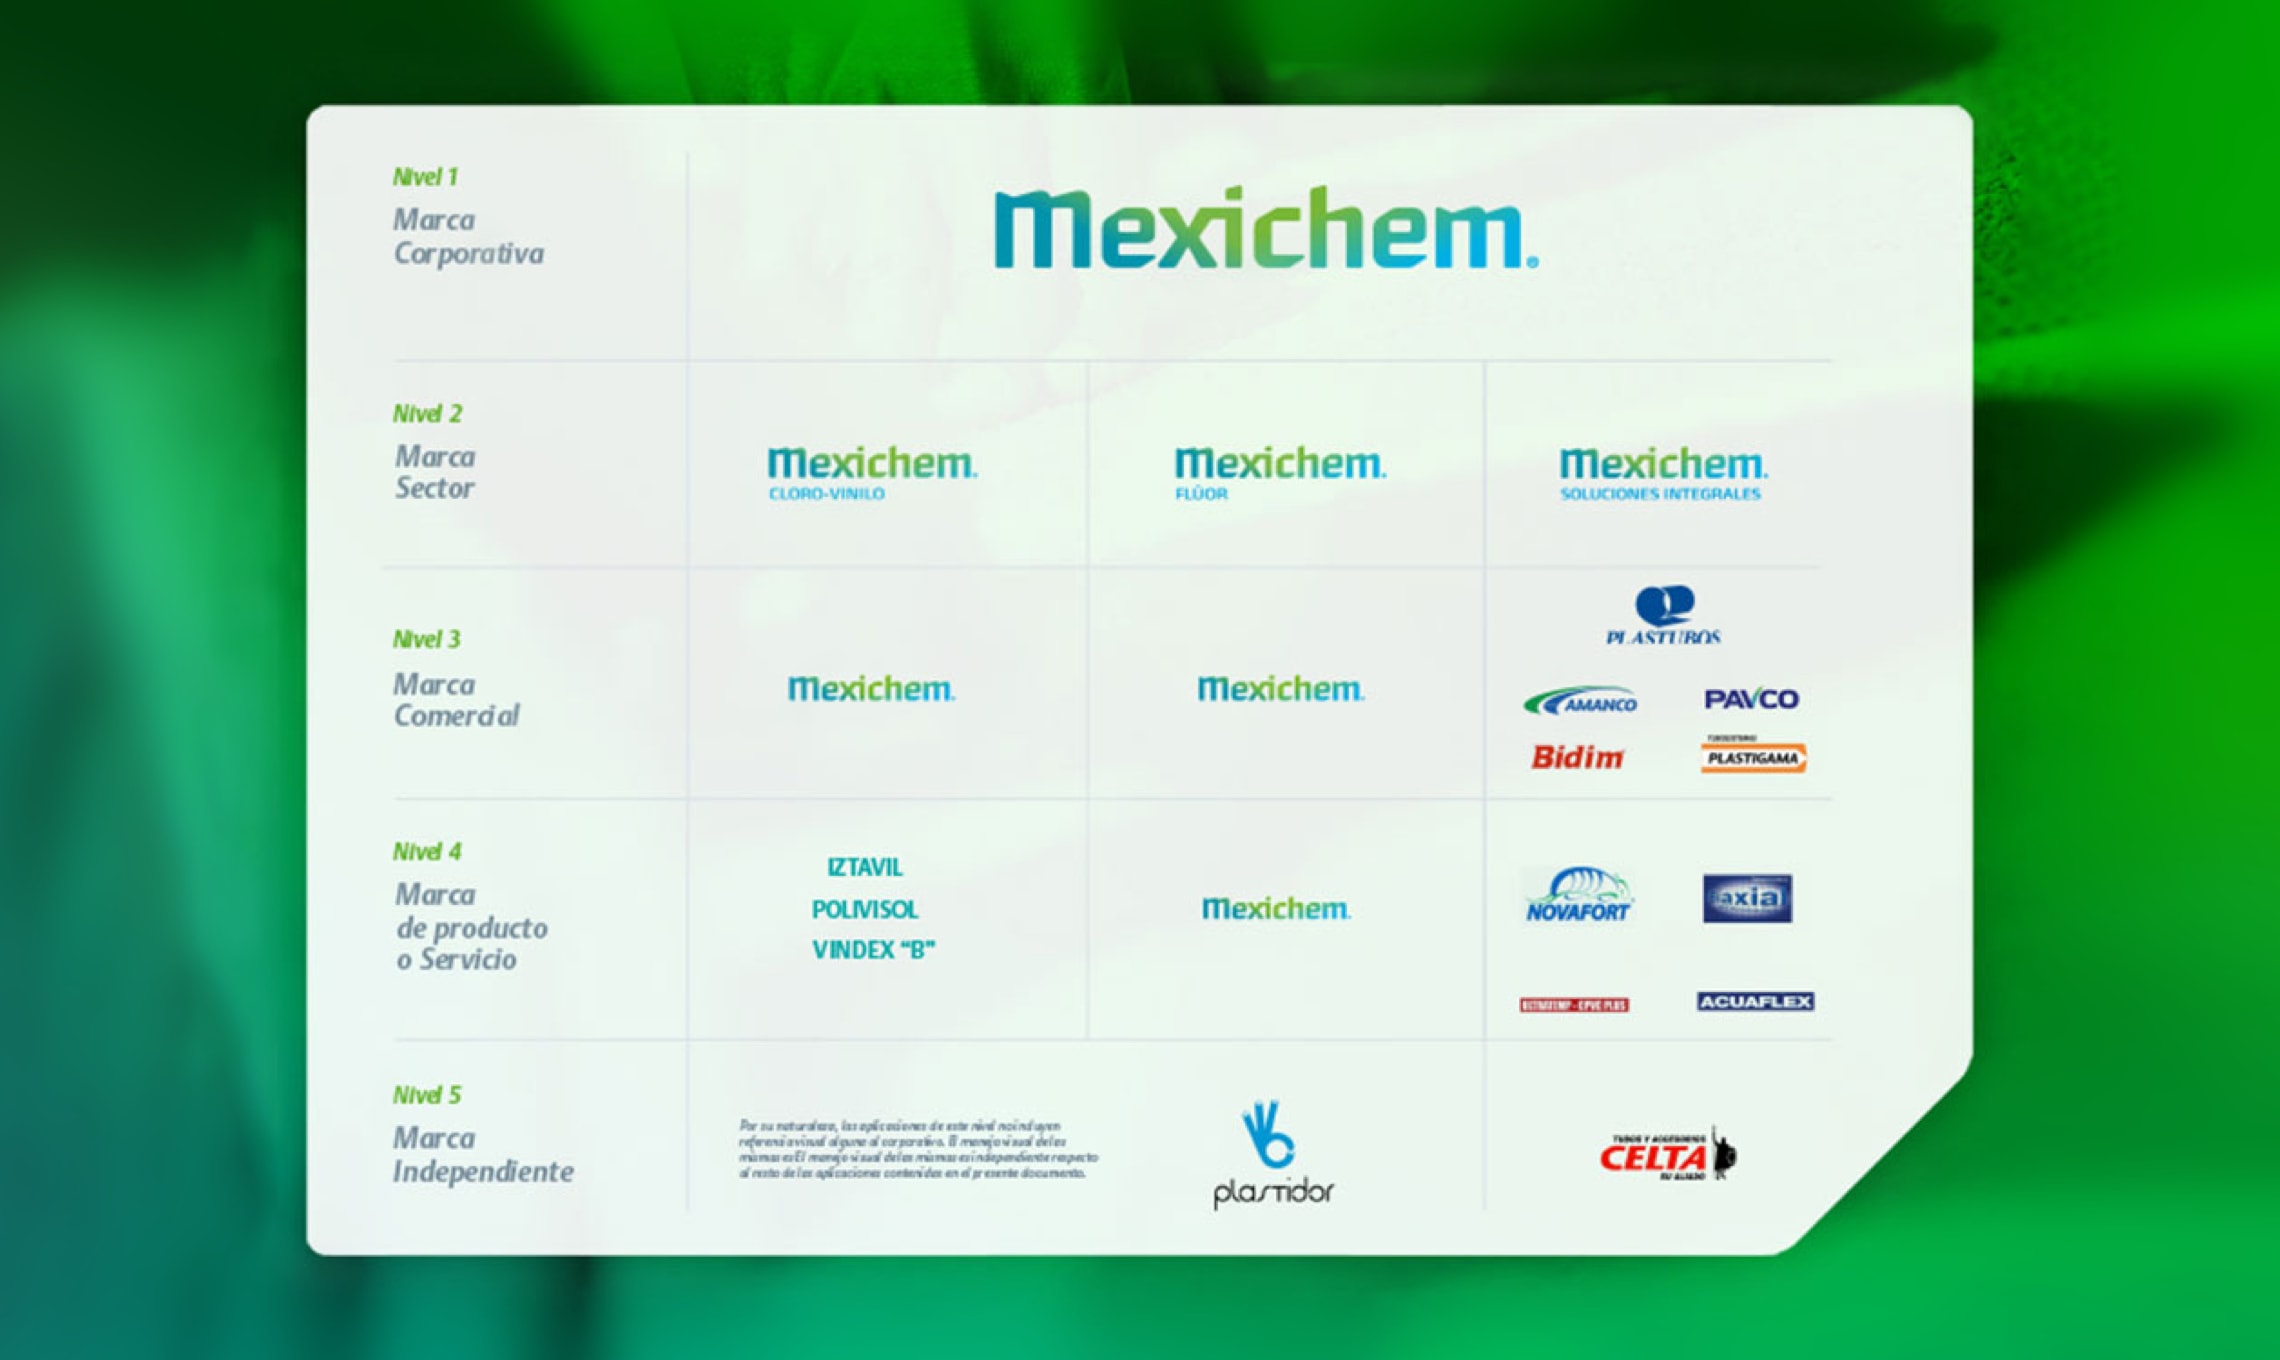 A brand architecture featuring the green background and the words maxchem.